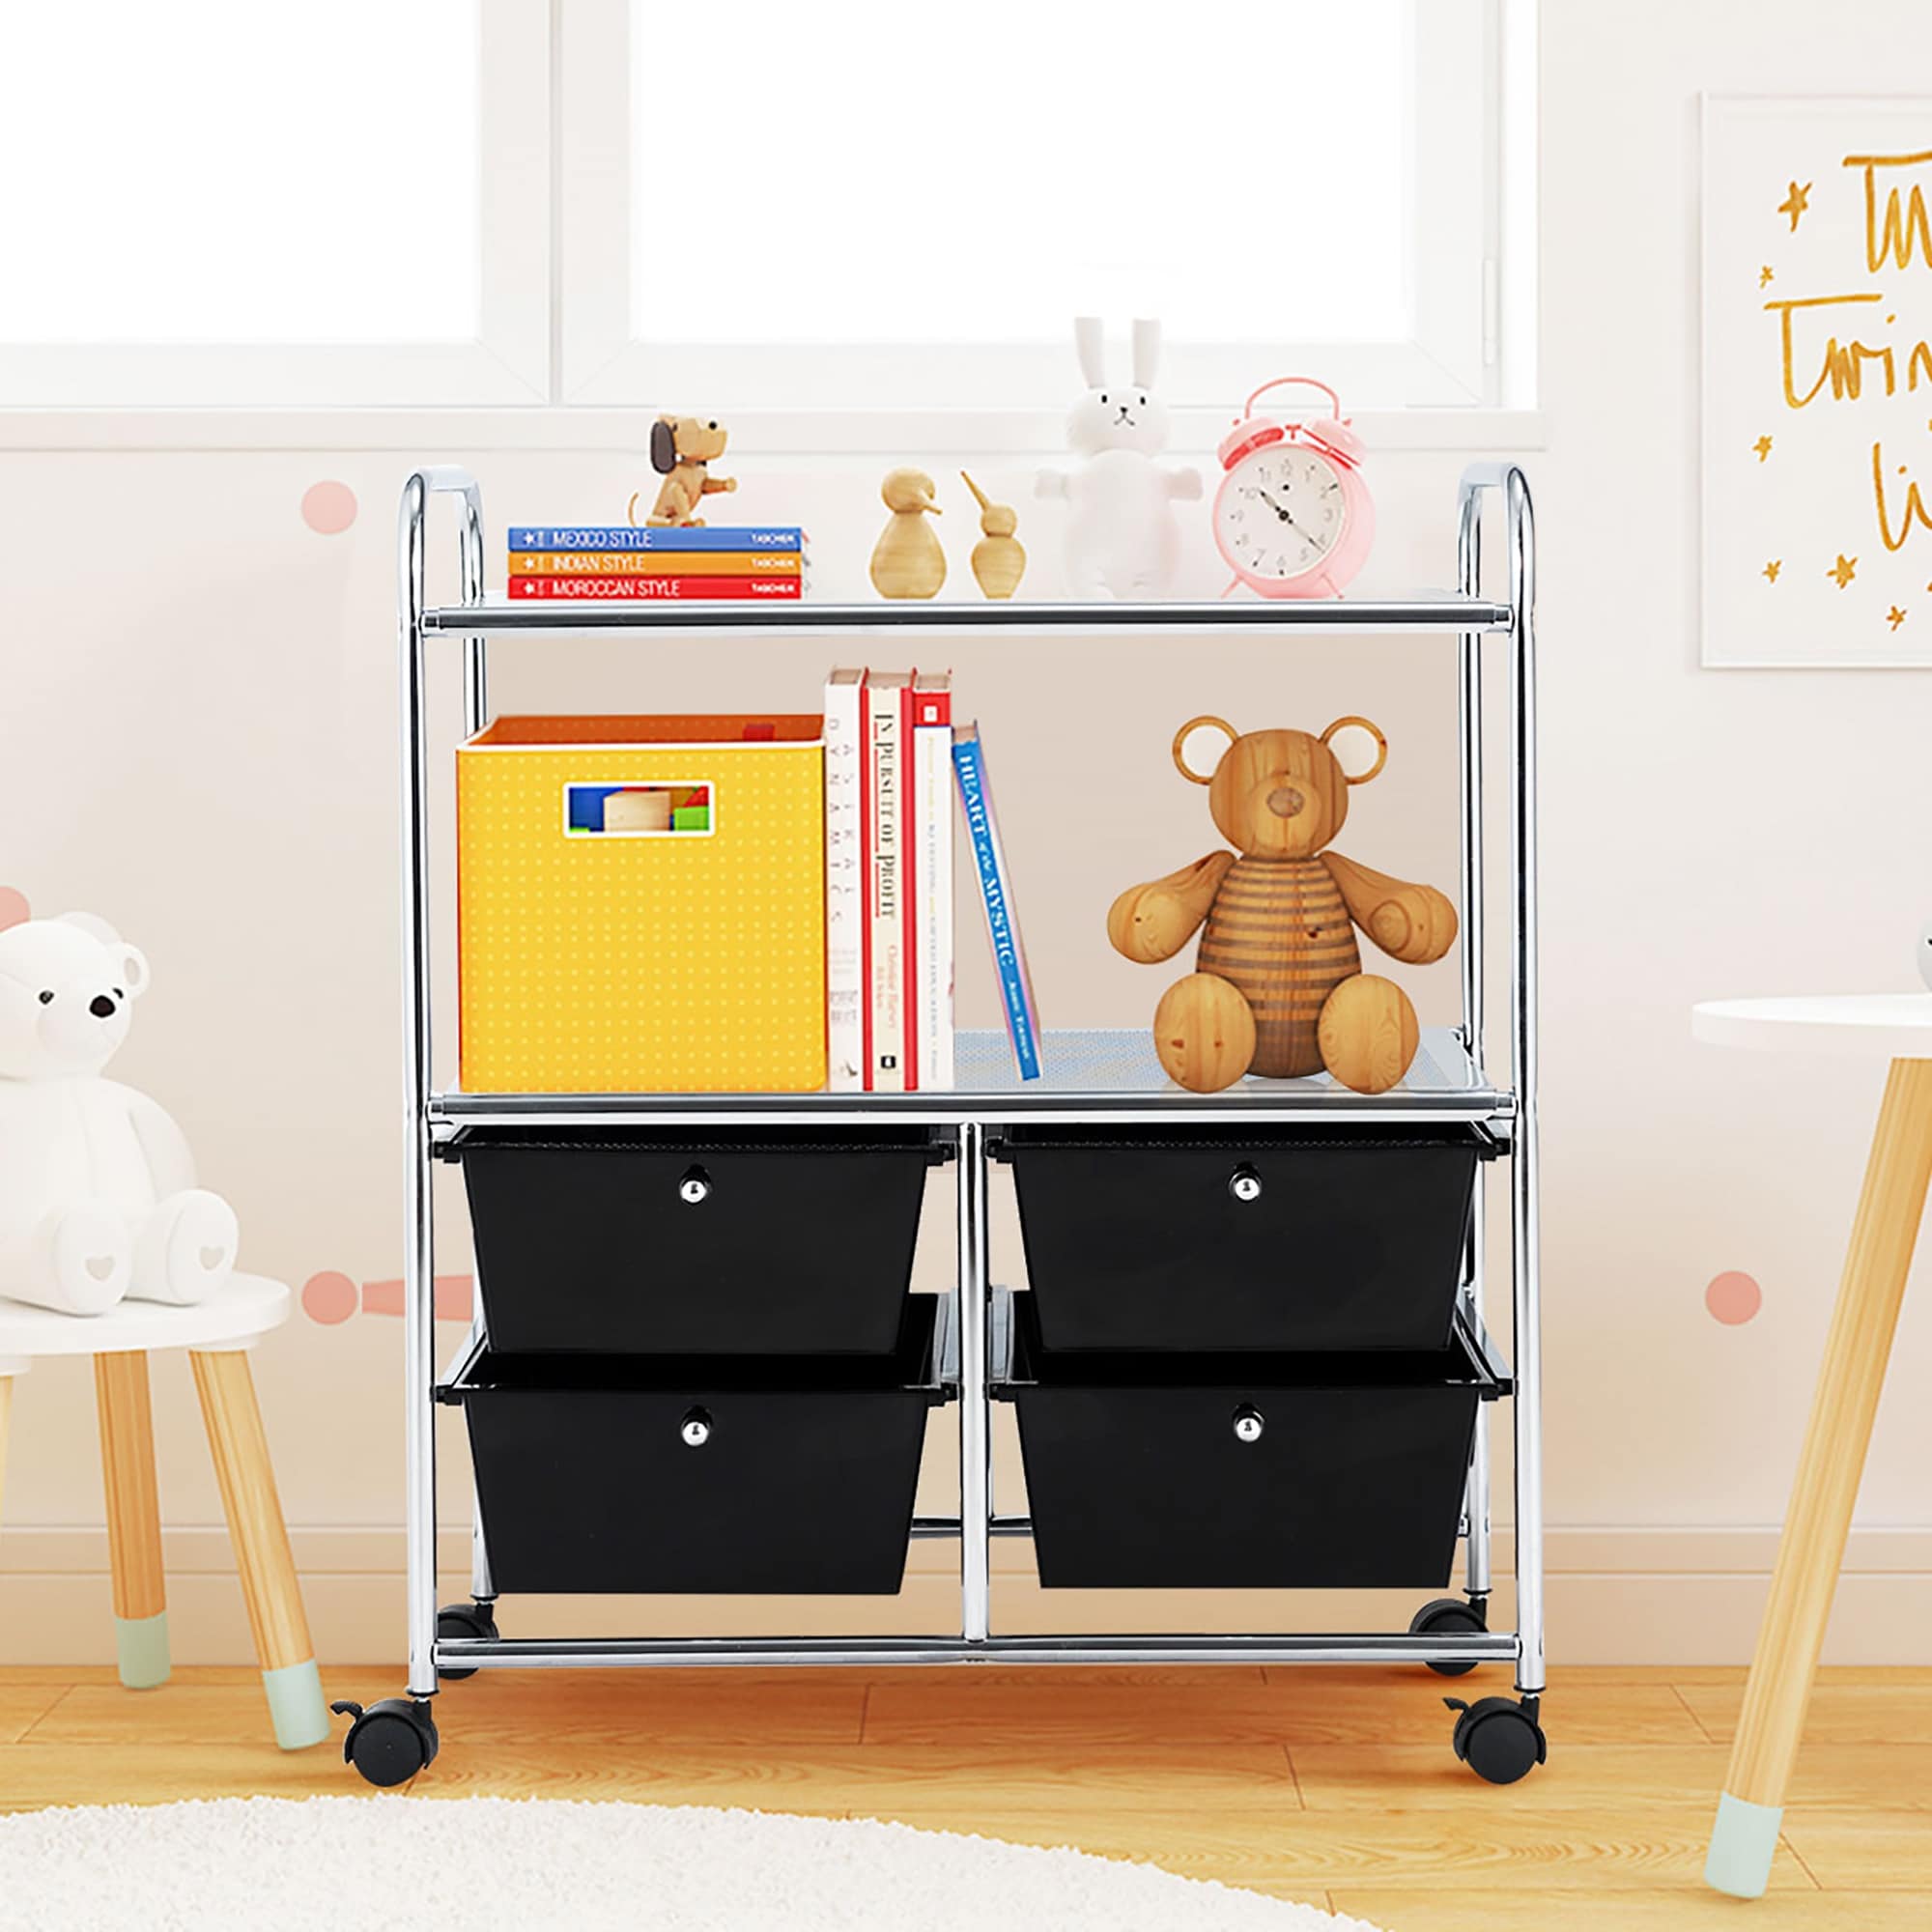 https://ak1.ostkcdn.com/images/products/is/images/direct/c5b98a46efd3b12d7a8211546c501820b50d58c0/Rolling-Storage-Cart-Metal-Rack-Shelf-with-4-Drawers-2-Shelves.jpg